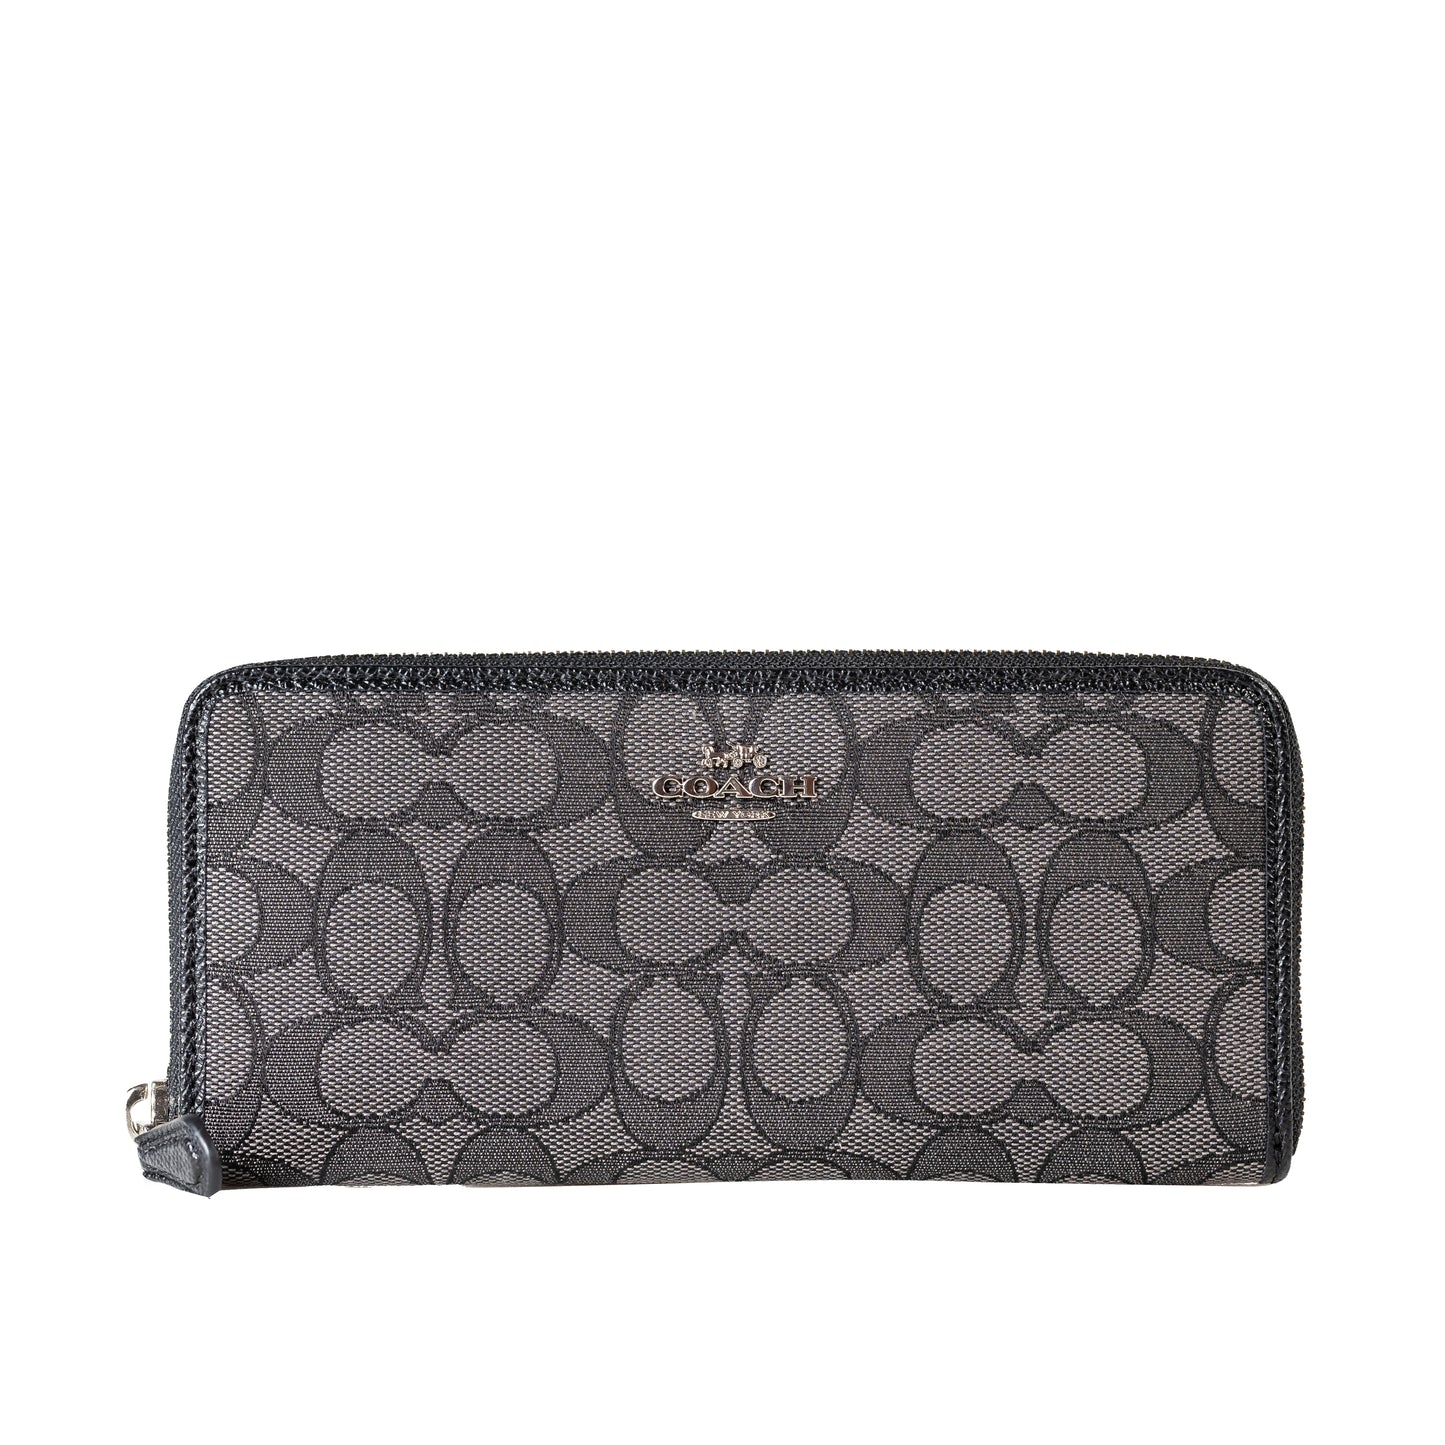 Coach Long Wallet Slim Accordion Zip Wallet Signature Jacquard Smoke Black Silver-Tone Hardware Zip-Around Closure Multiple Card Slots Full-Length Bill Compartments Center Coin Compartment Compact Size